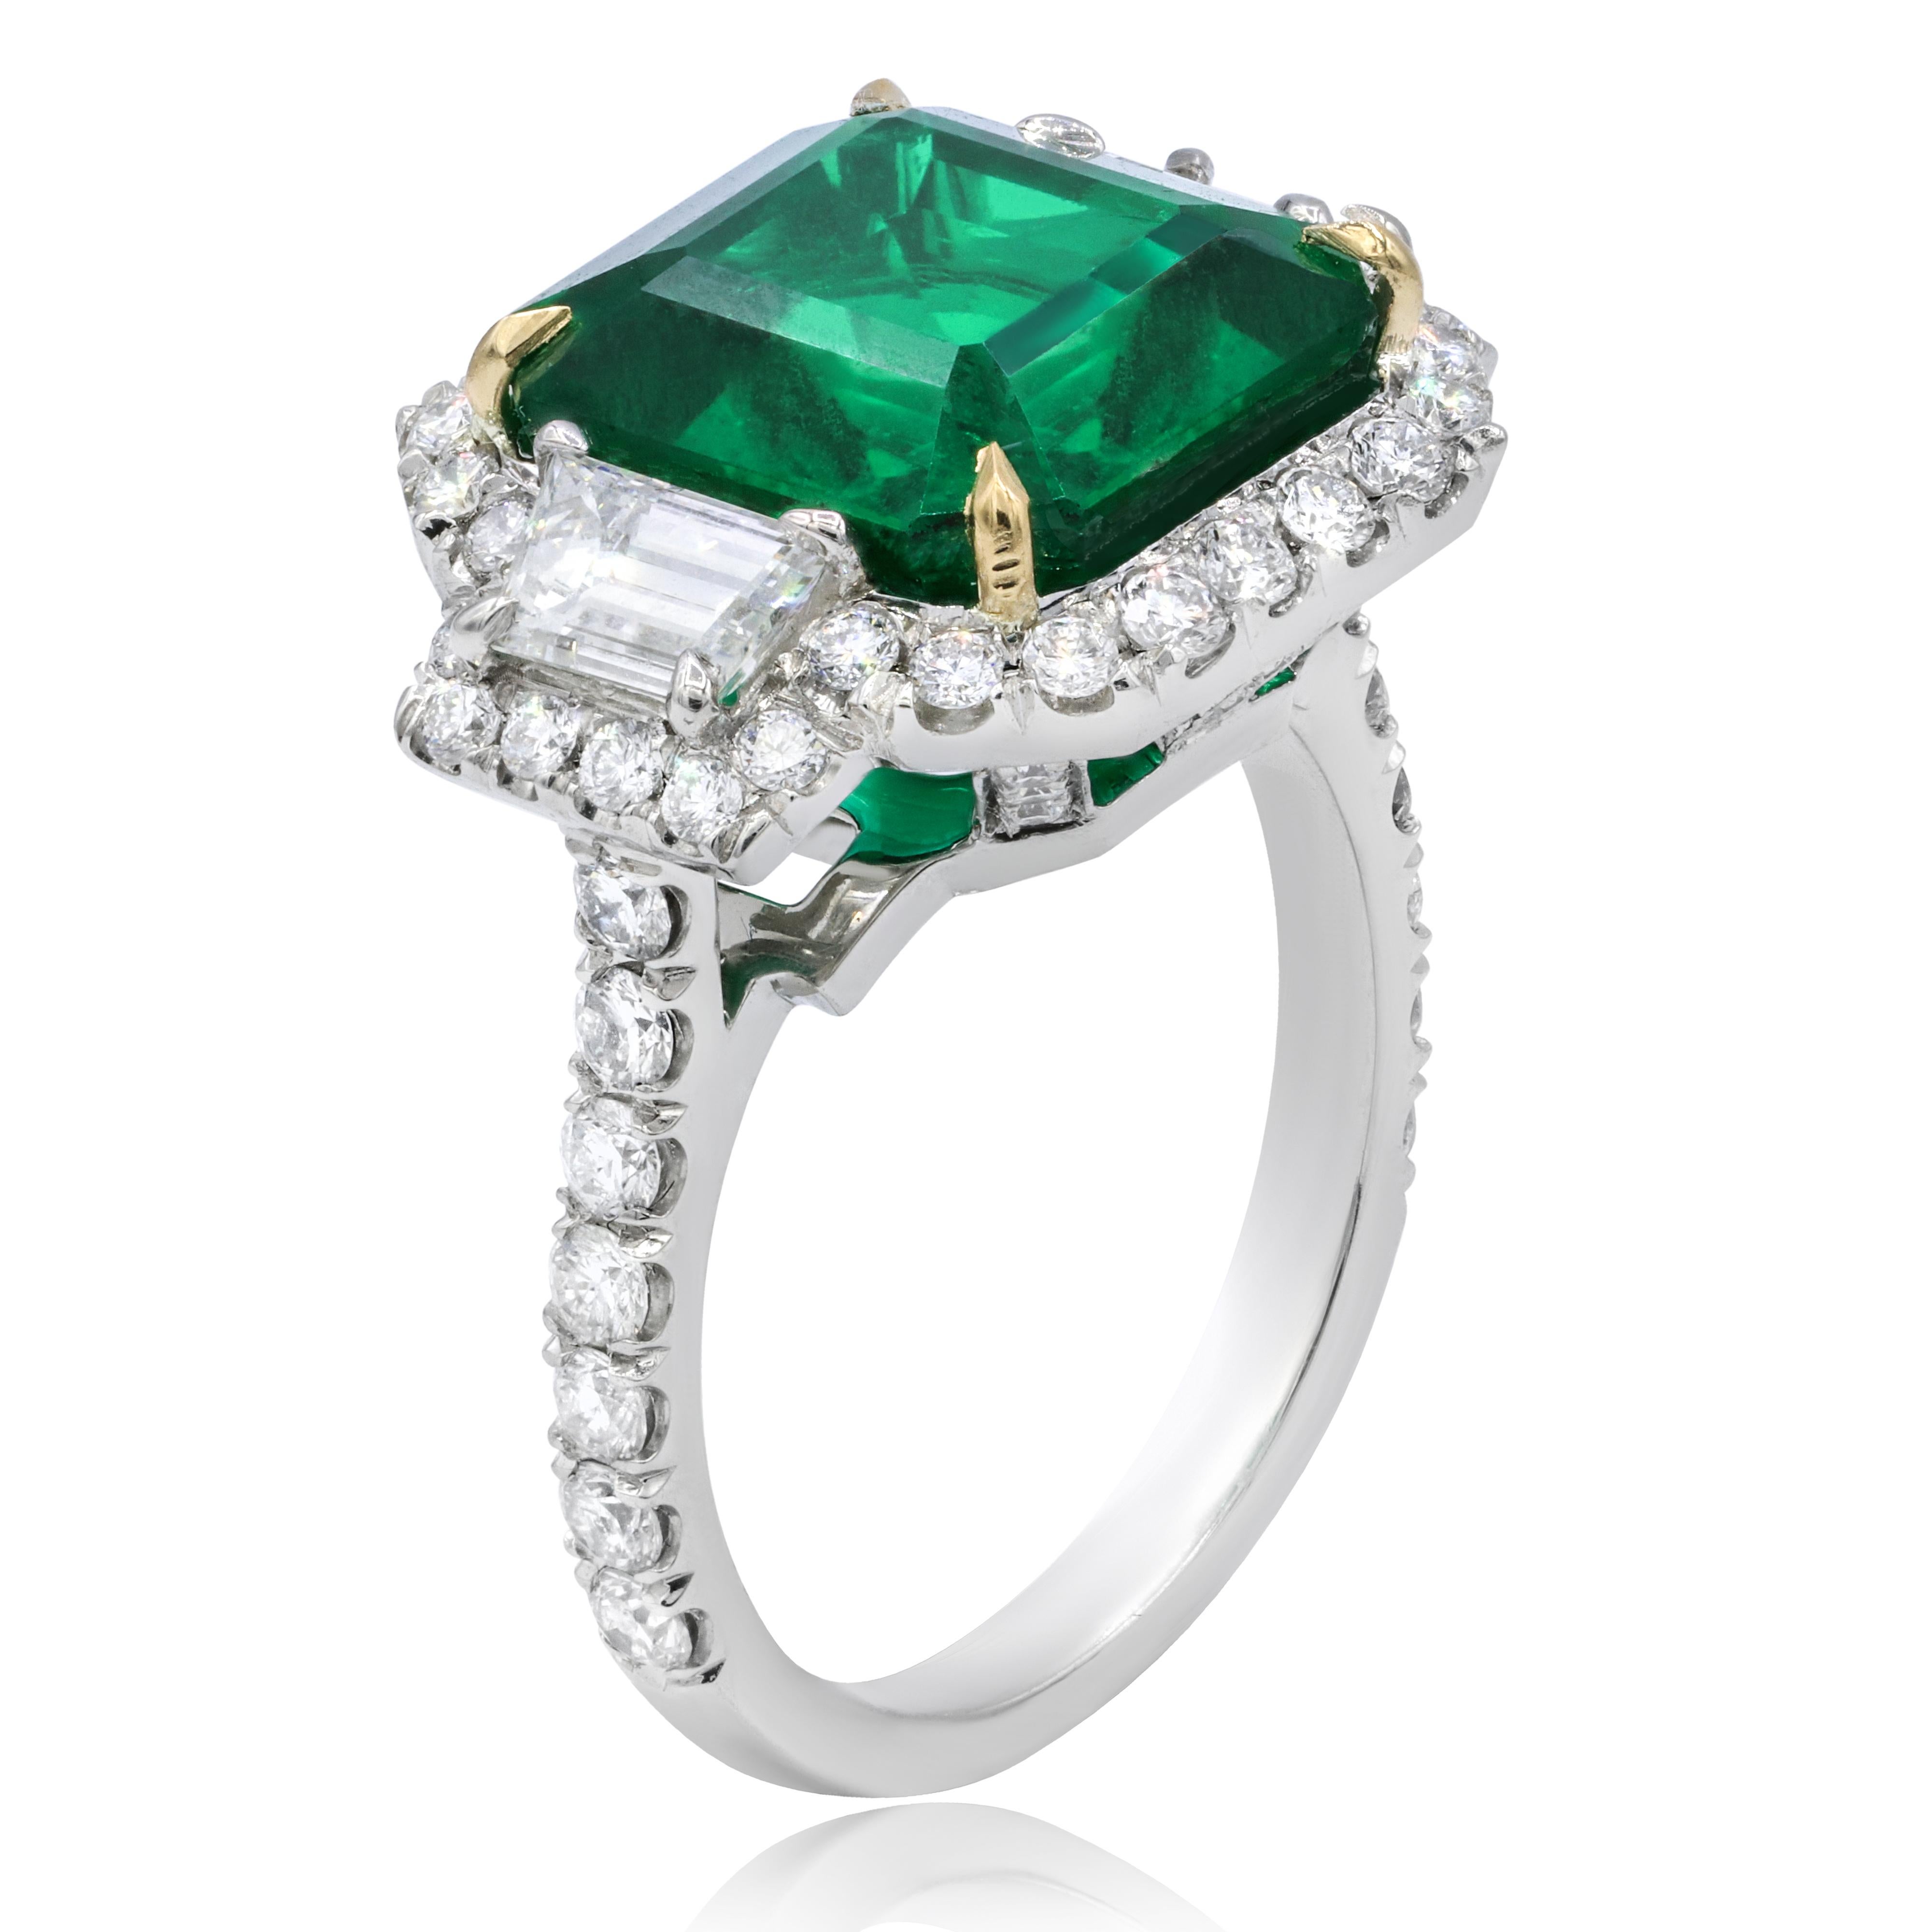 Platinum and 18k yellow gold green emerald ring features 6.67 ct green emerald set with 1.40 cts of baguette diamonds and round diamonds in a halo setting.
Ring size: 6
Can be resized to any finger size.

This product comes with a certificate of